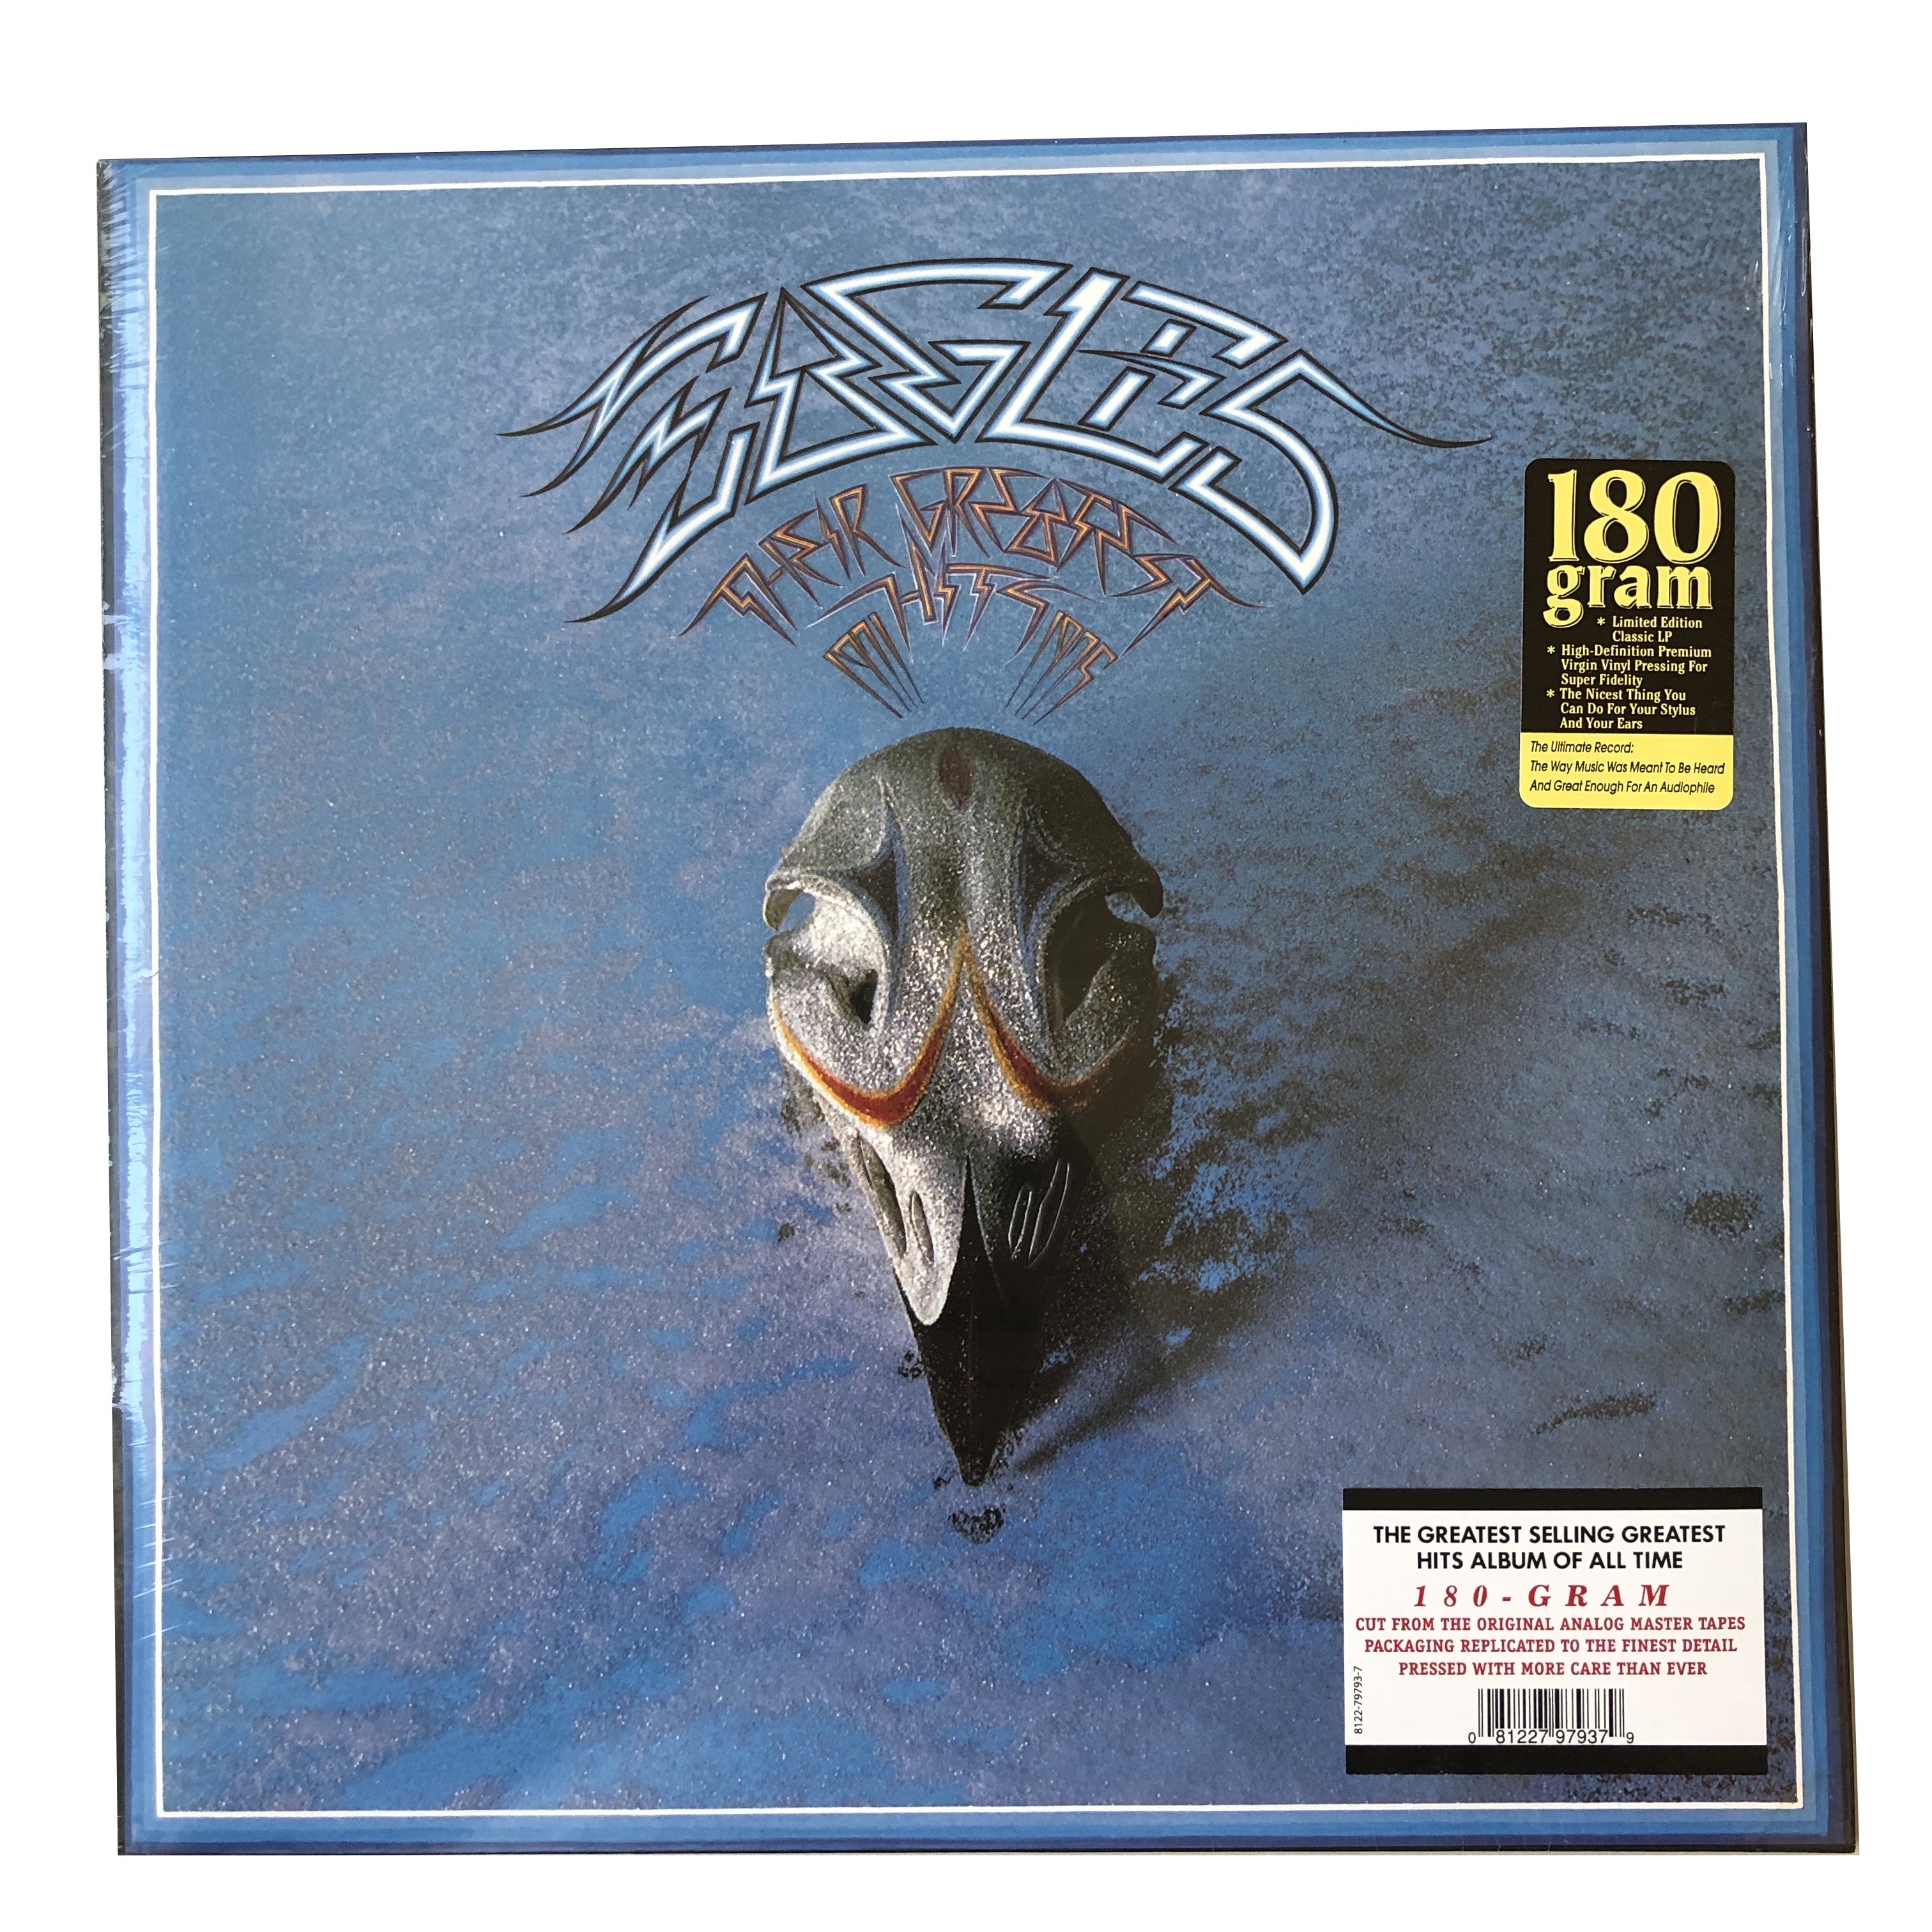 The Eagles - Their Greatest Hits 1971 - 1975 LP — Guestroom Records